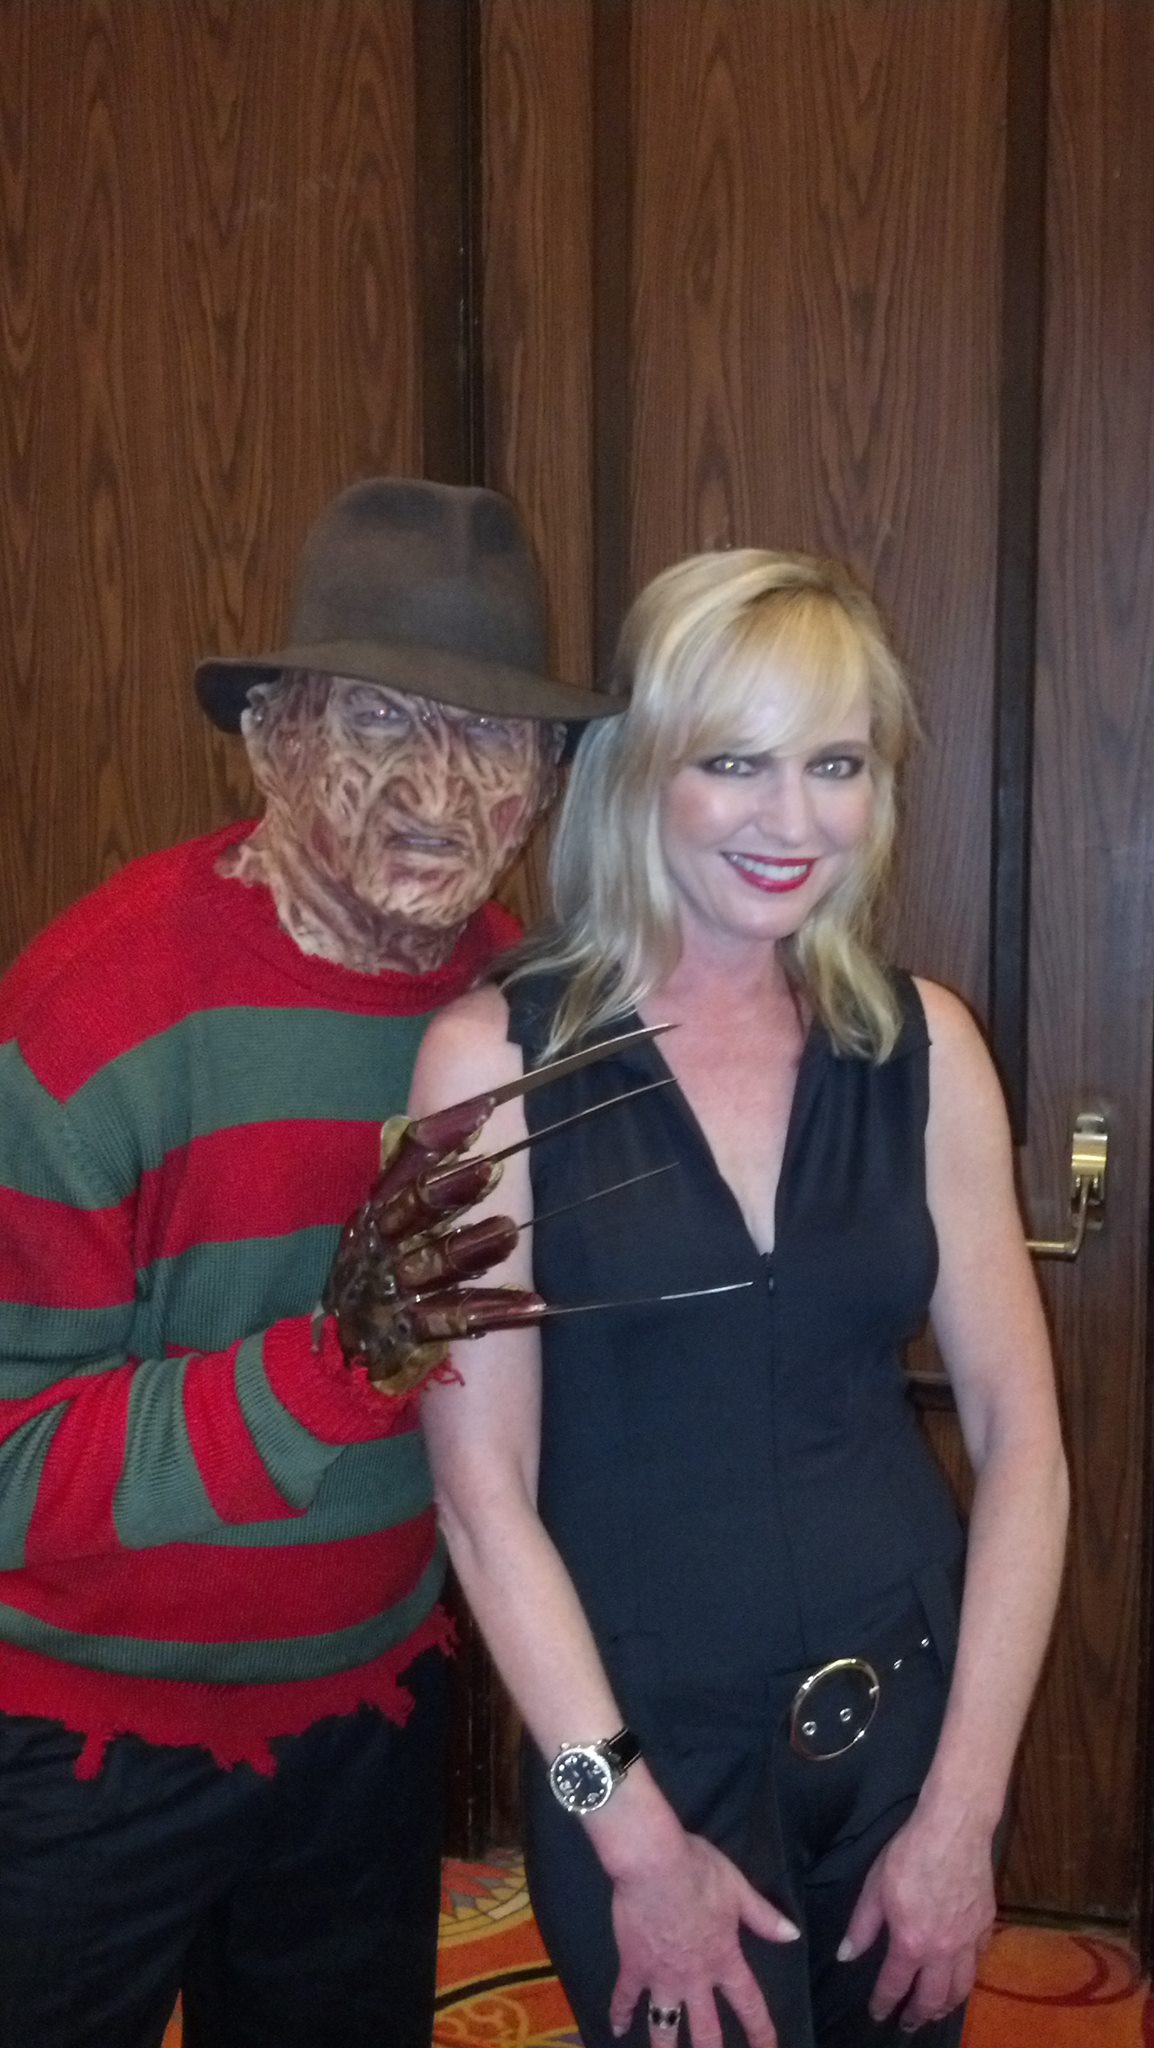 Nightmare on Elm Street star Wilcox poses with the man of her dreams. (Photo by Jeff Flynn)